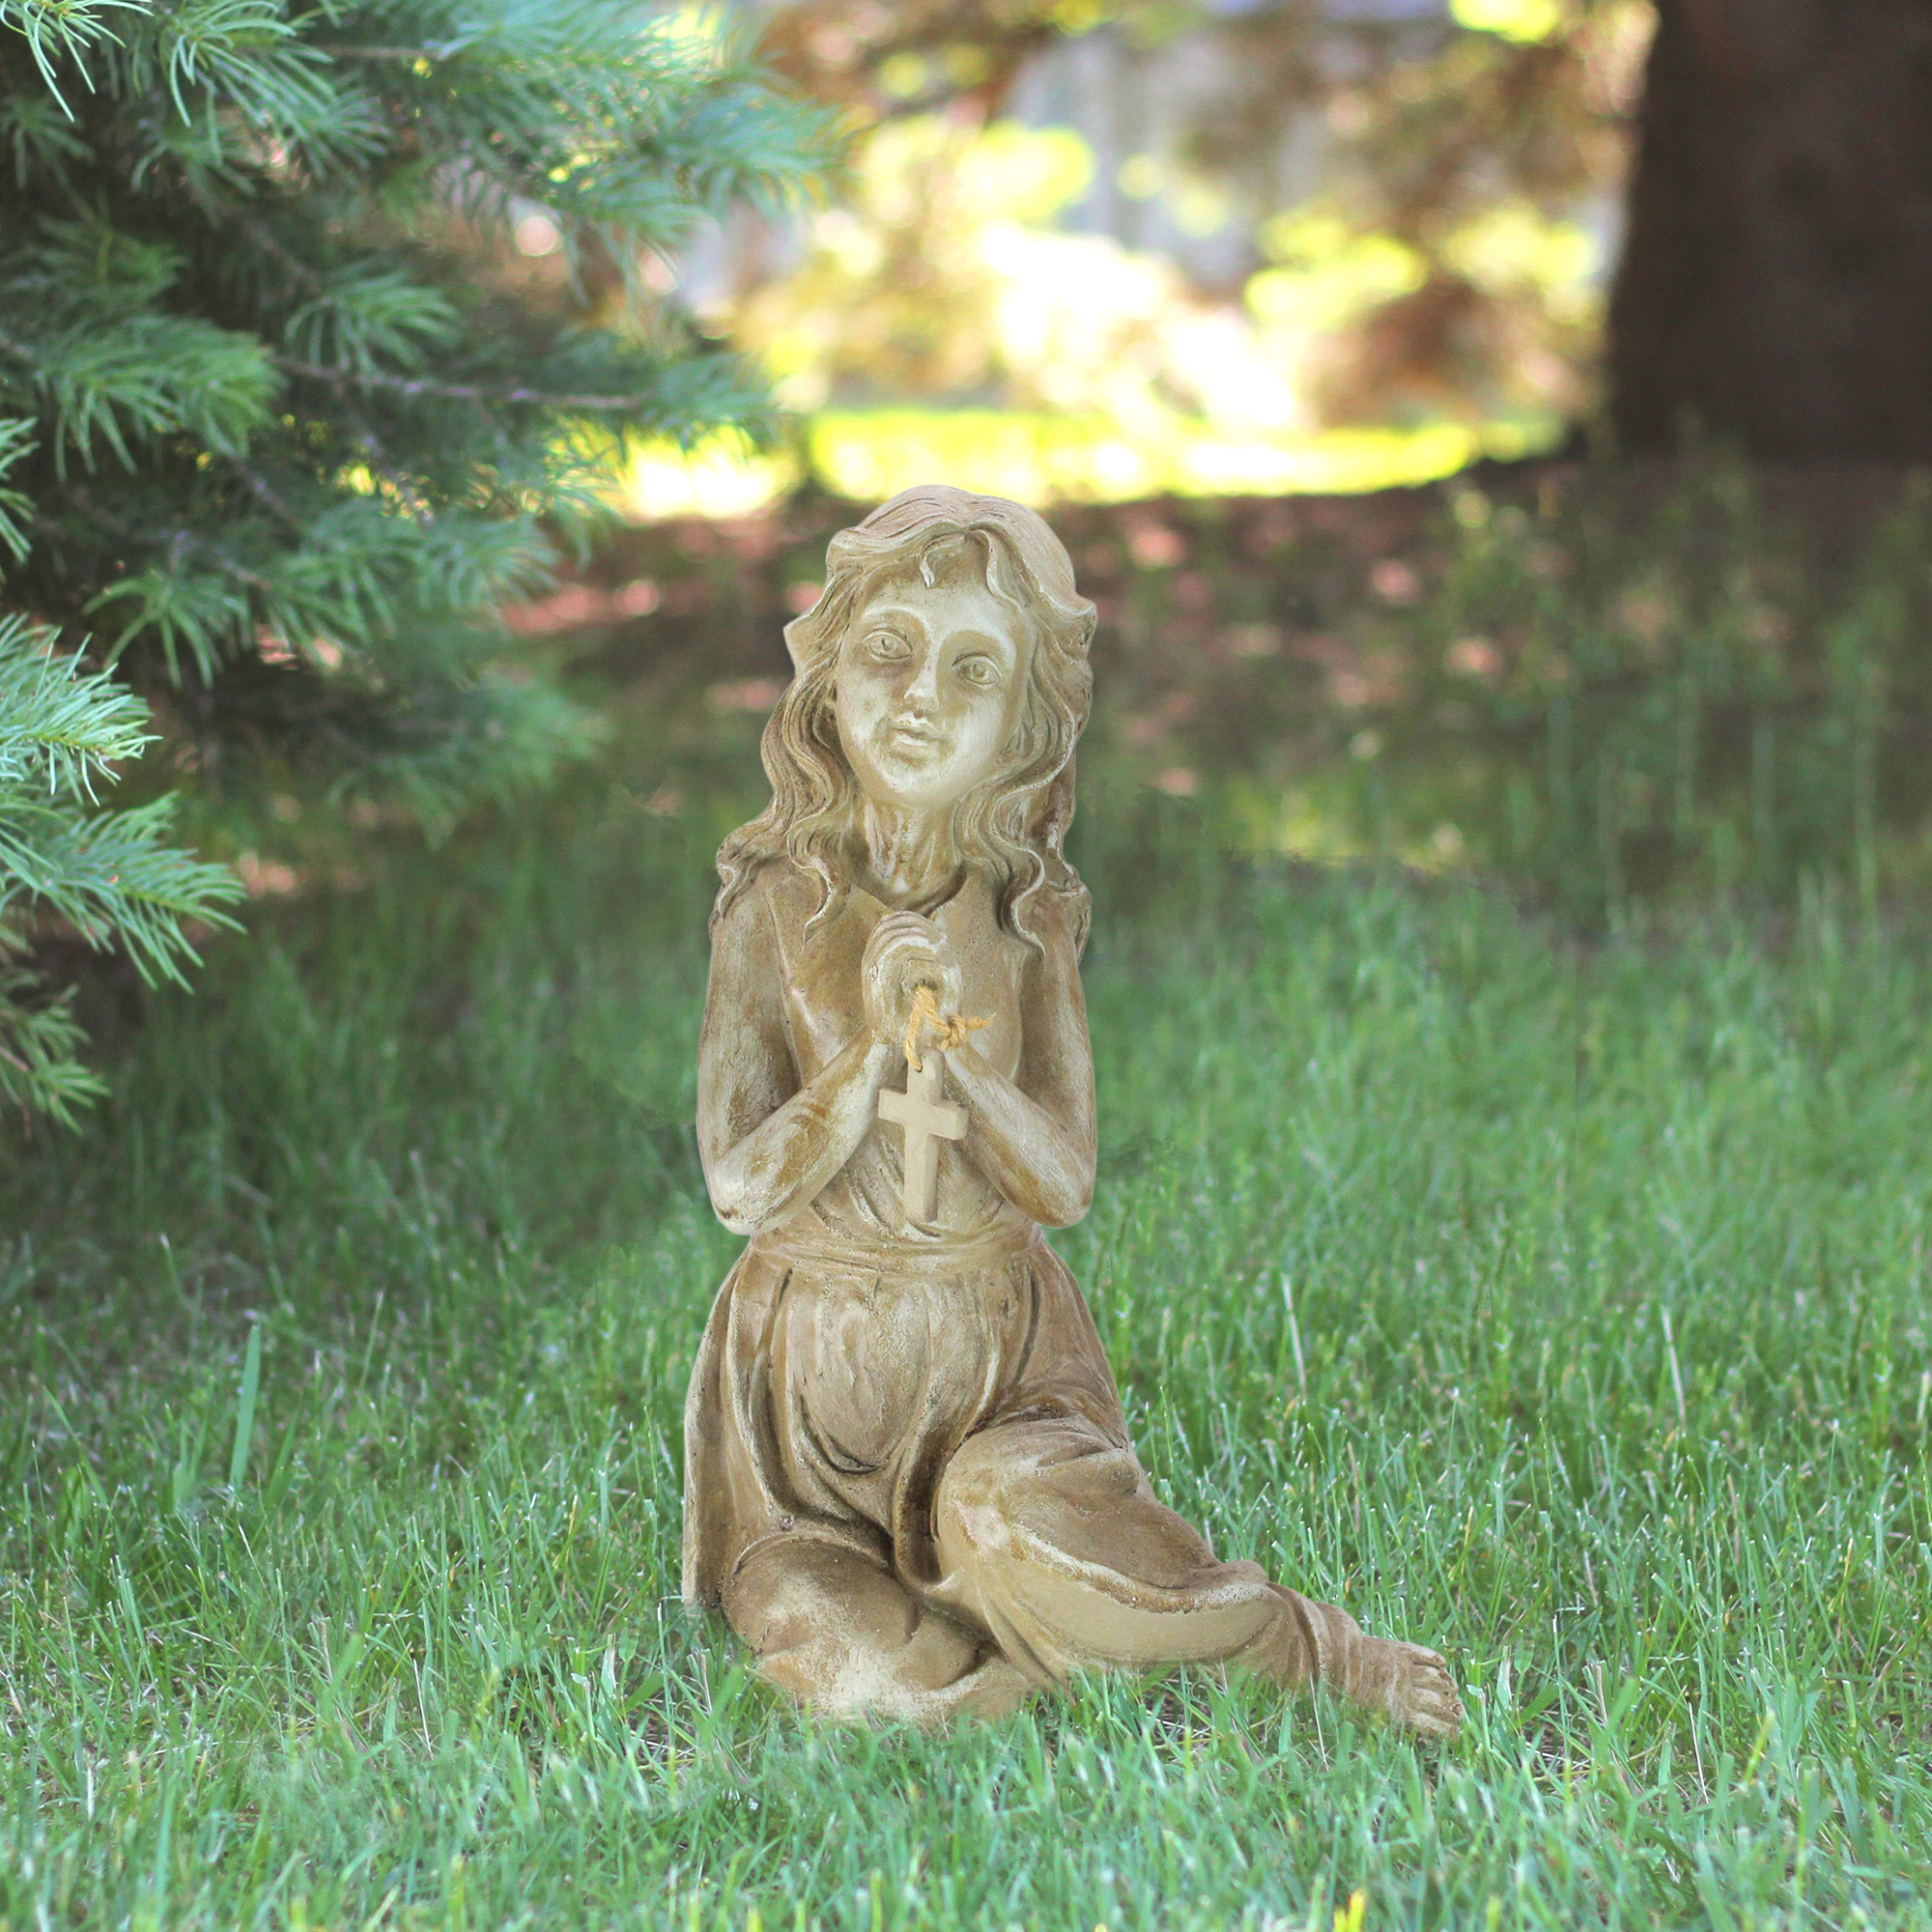 Northlight 14.5" Sitting Angel with Cross Garden Statue Outdoor Decoration - Brown - image 3 of 3